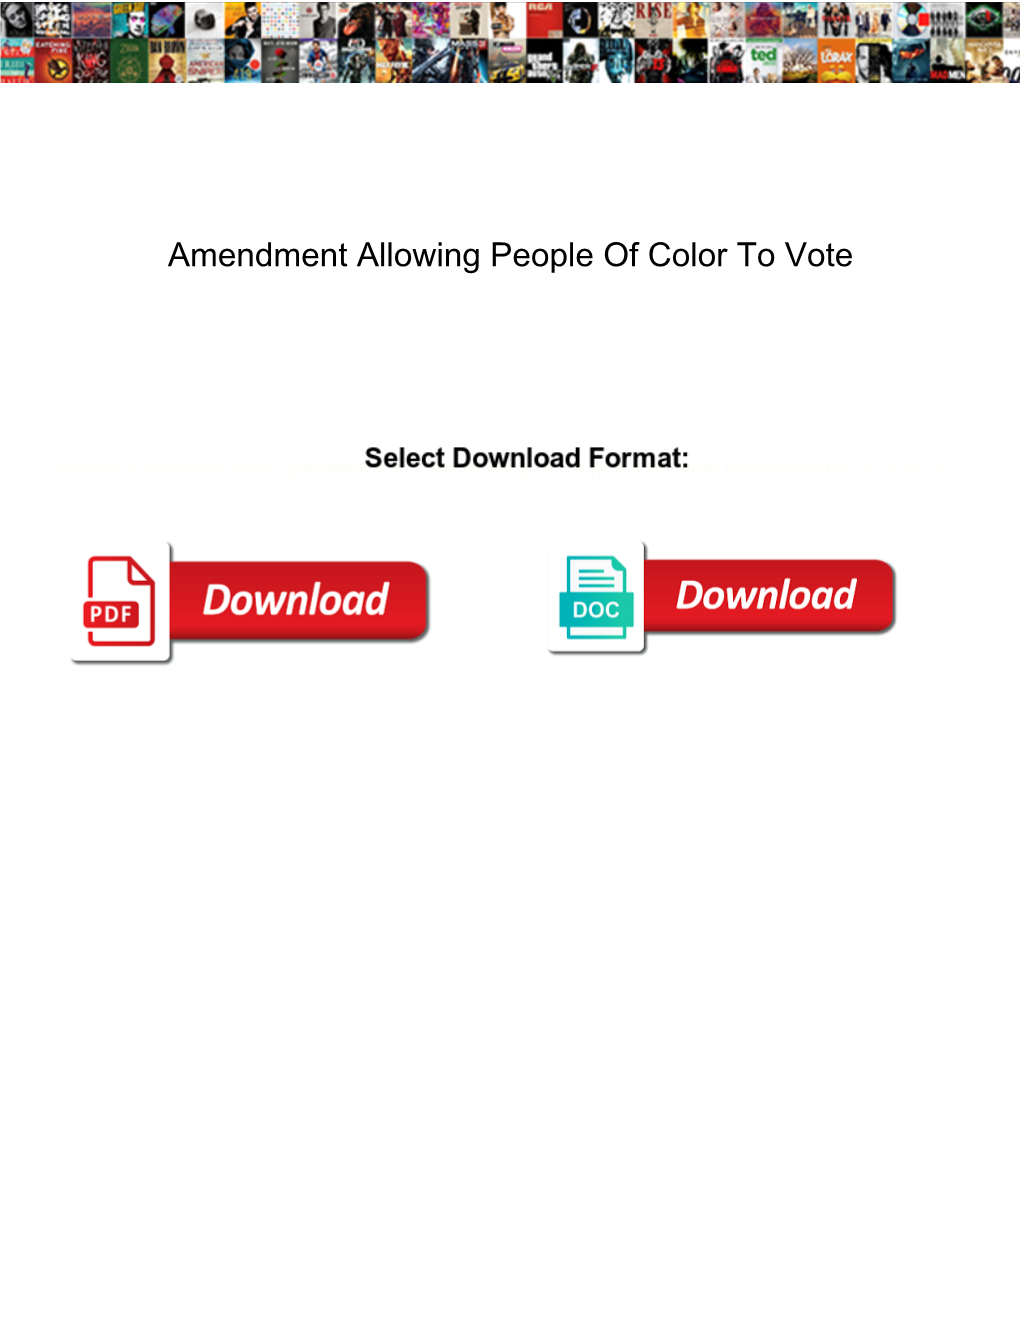 Amendment Allowing People of Color to Vote